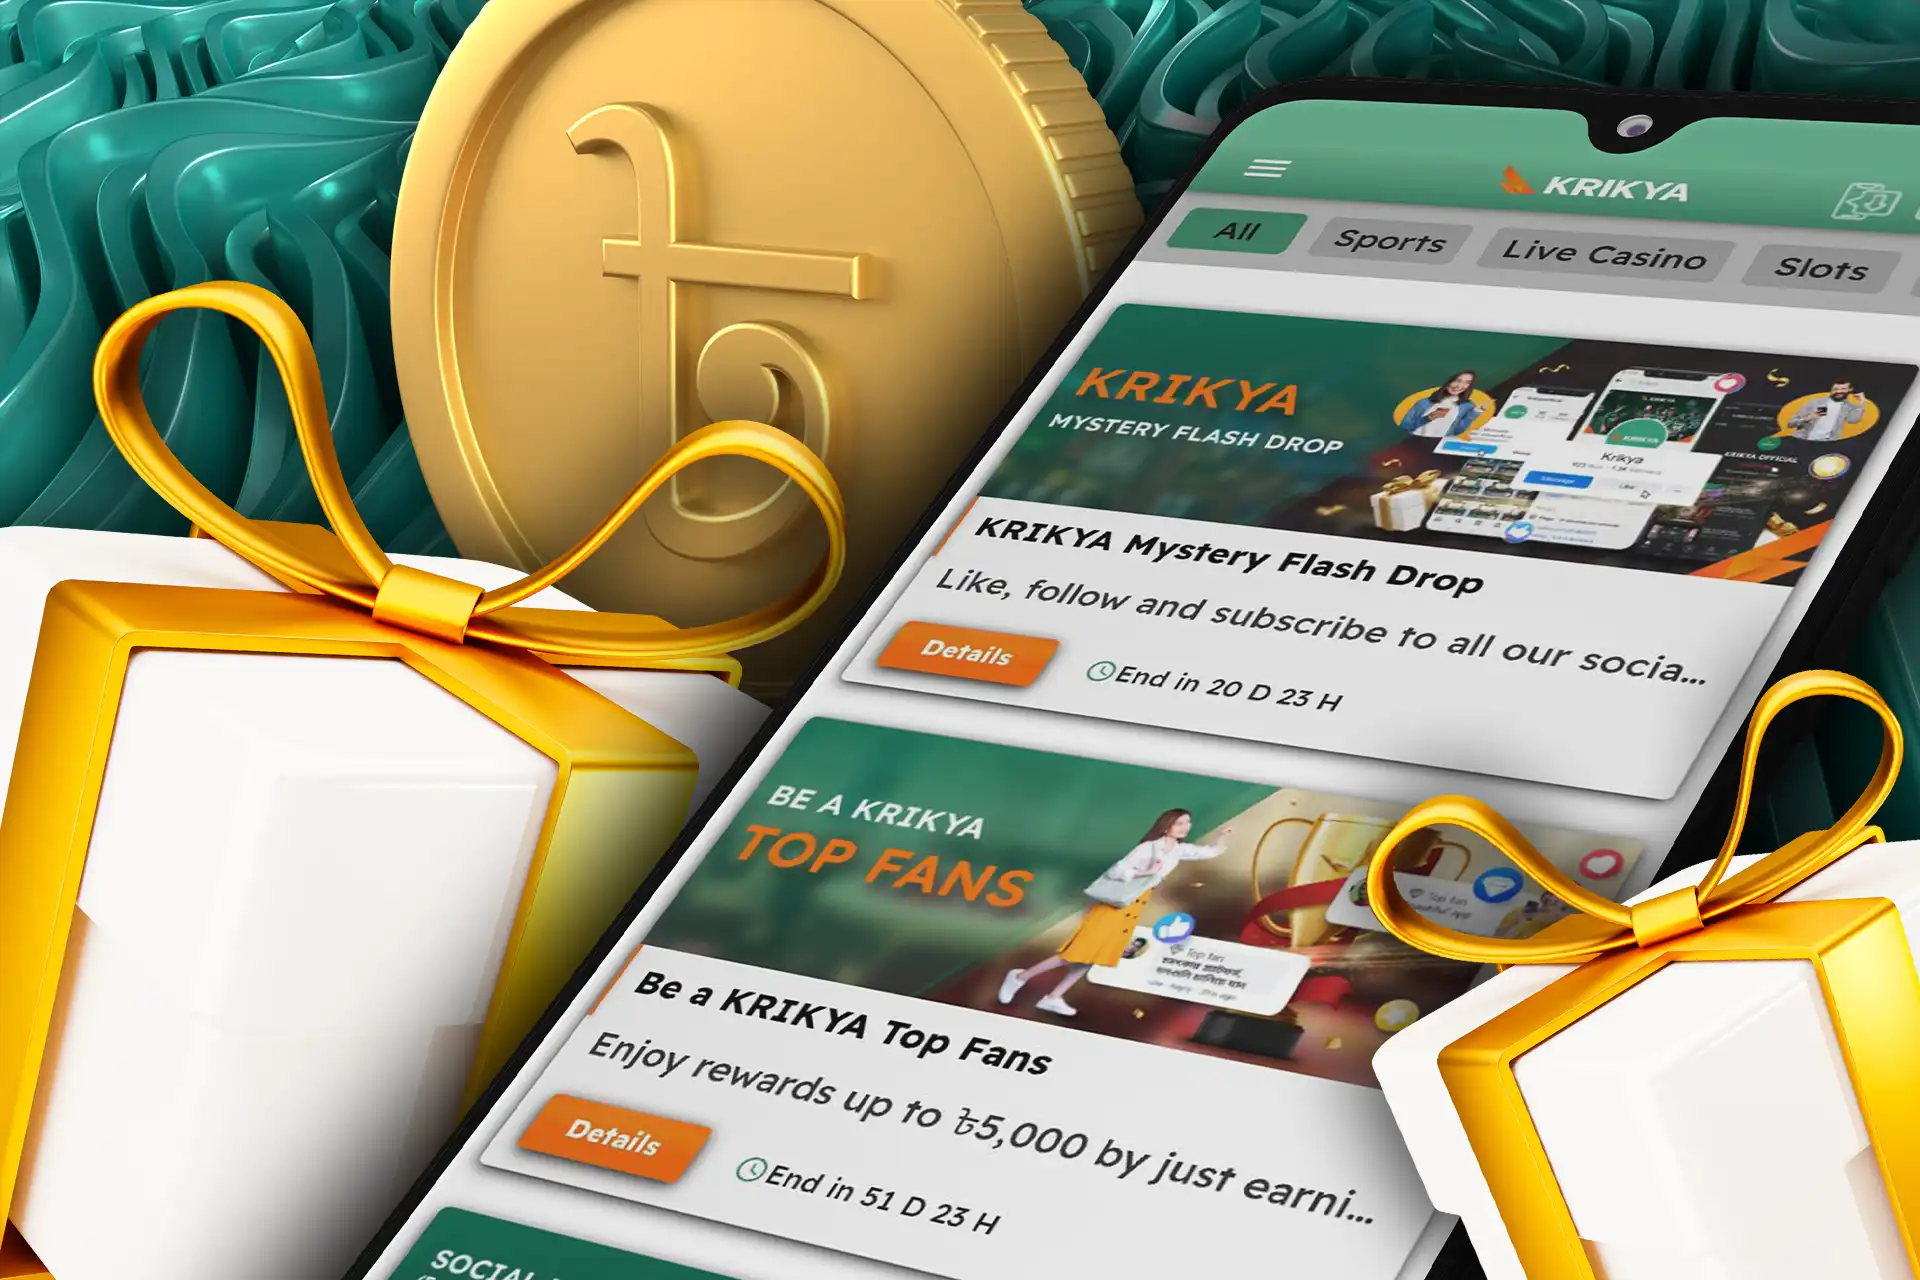 You will find regular bonuses and promotions in the Krikya app.